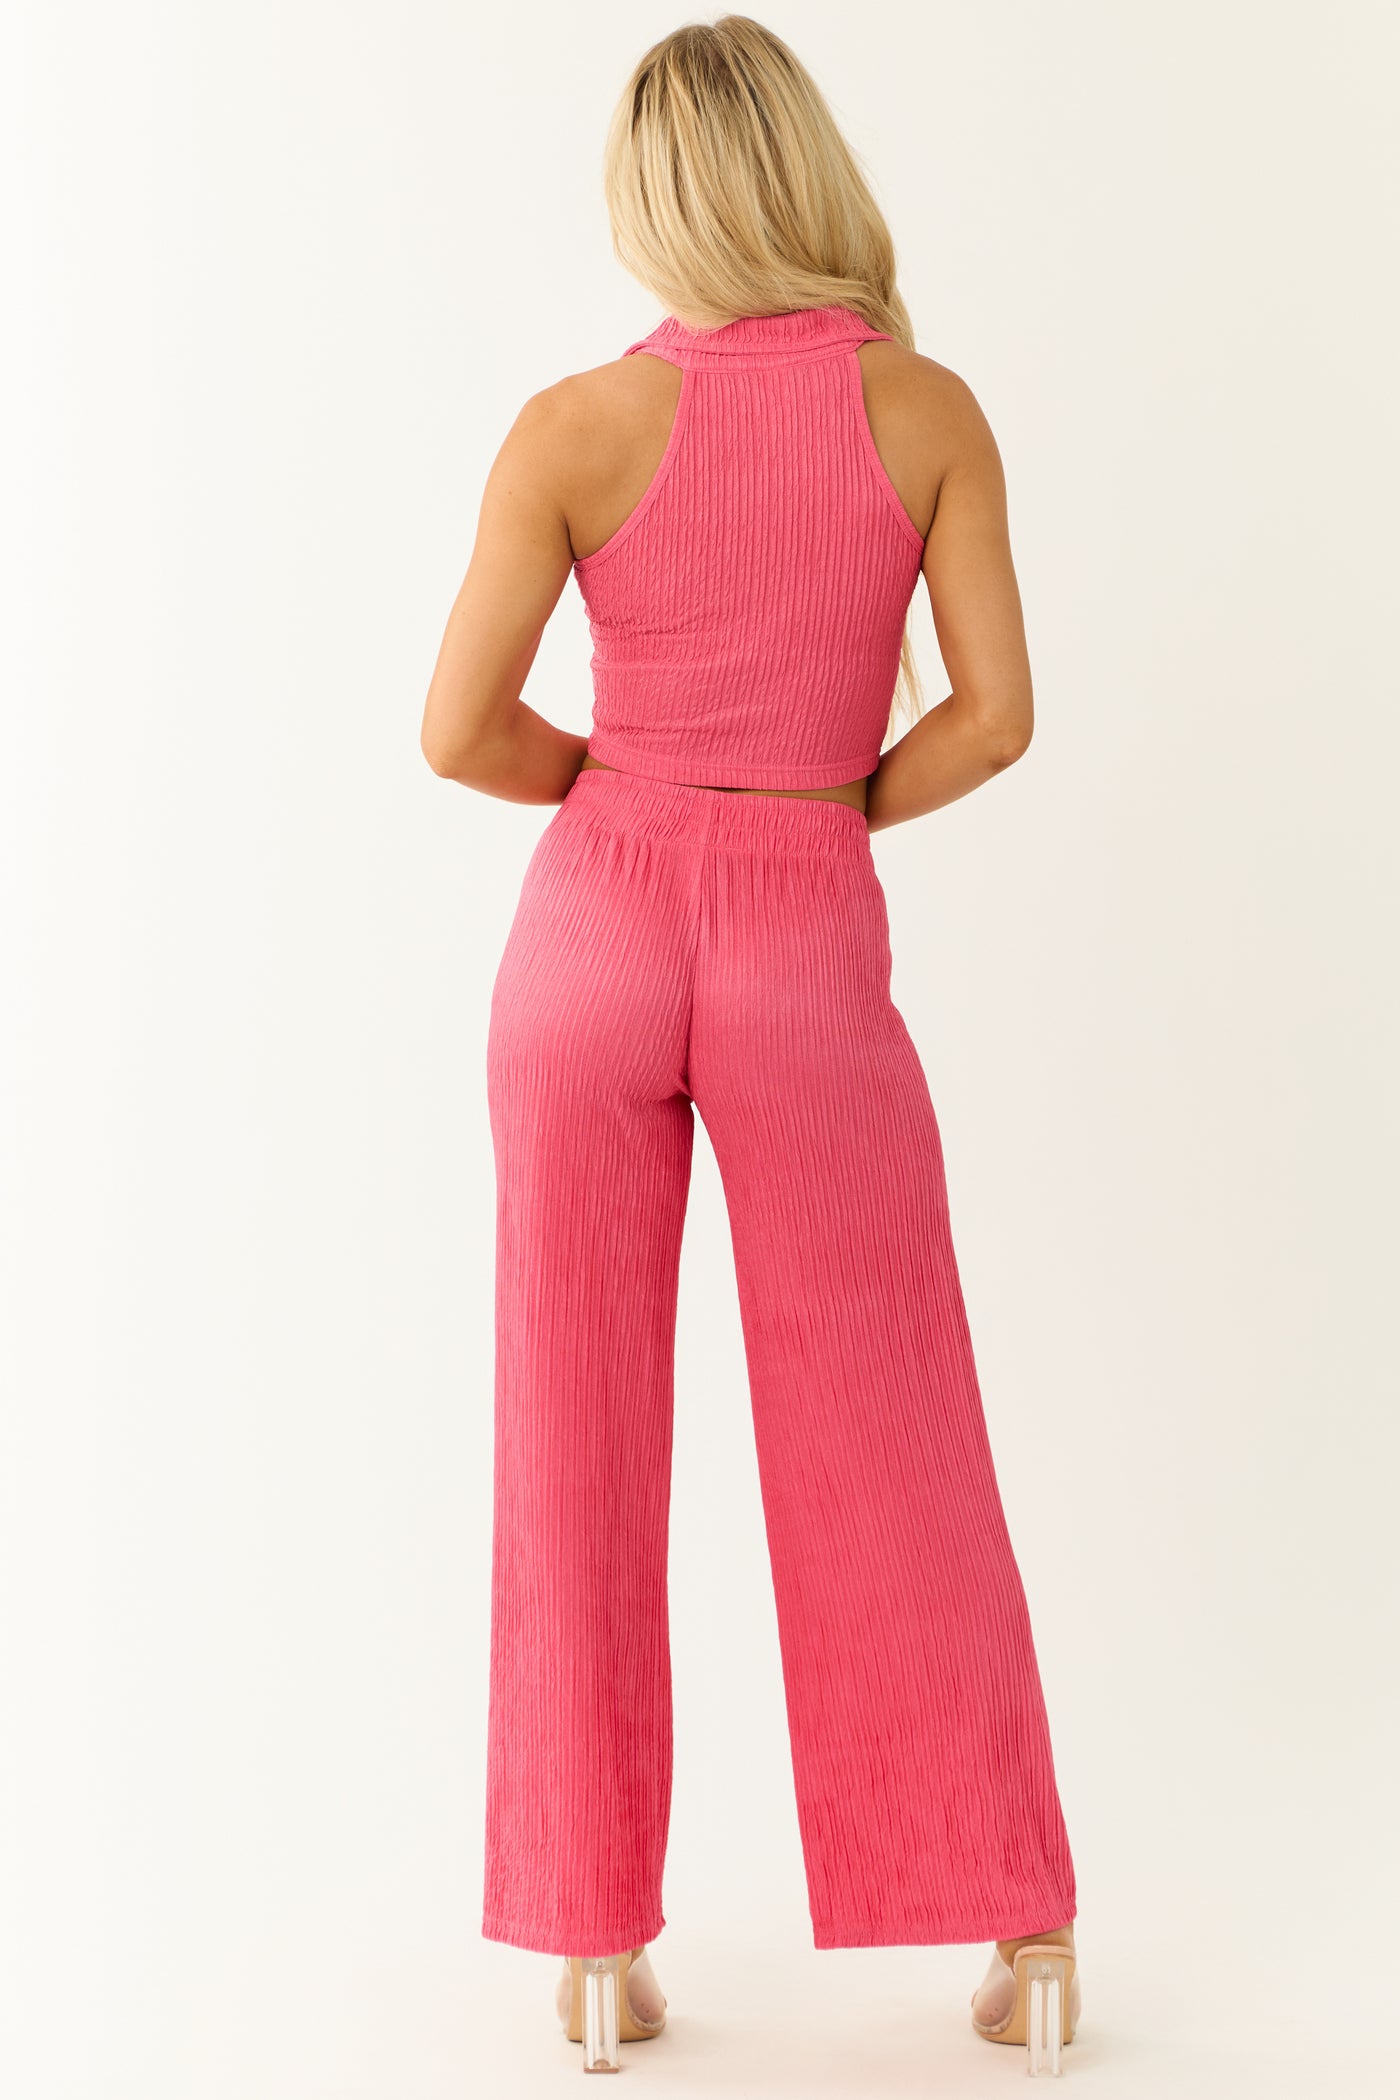 Watermelon Plisse Collared Top and Pants Set